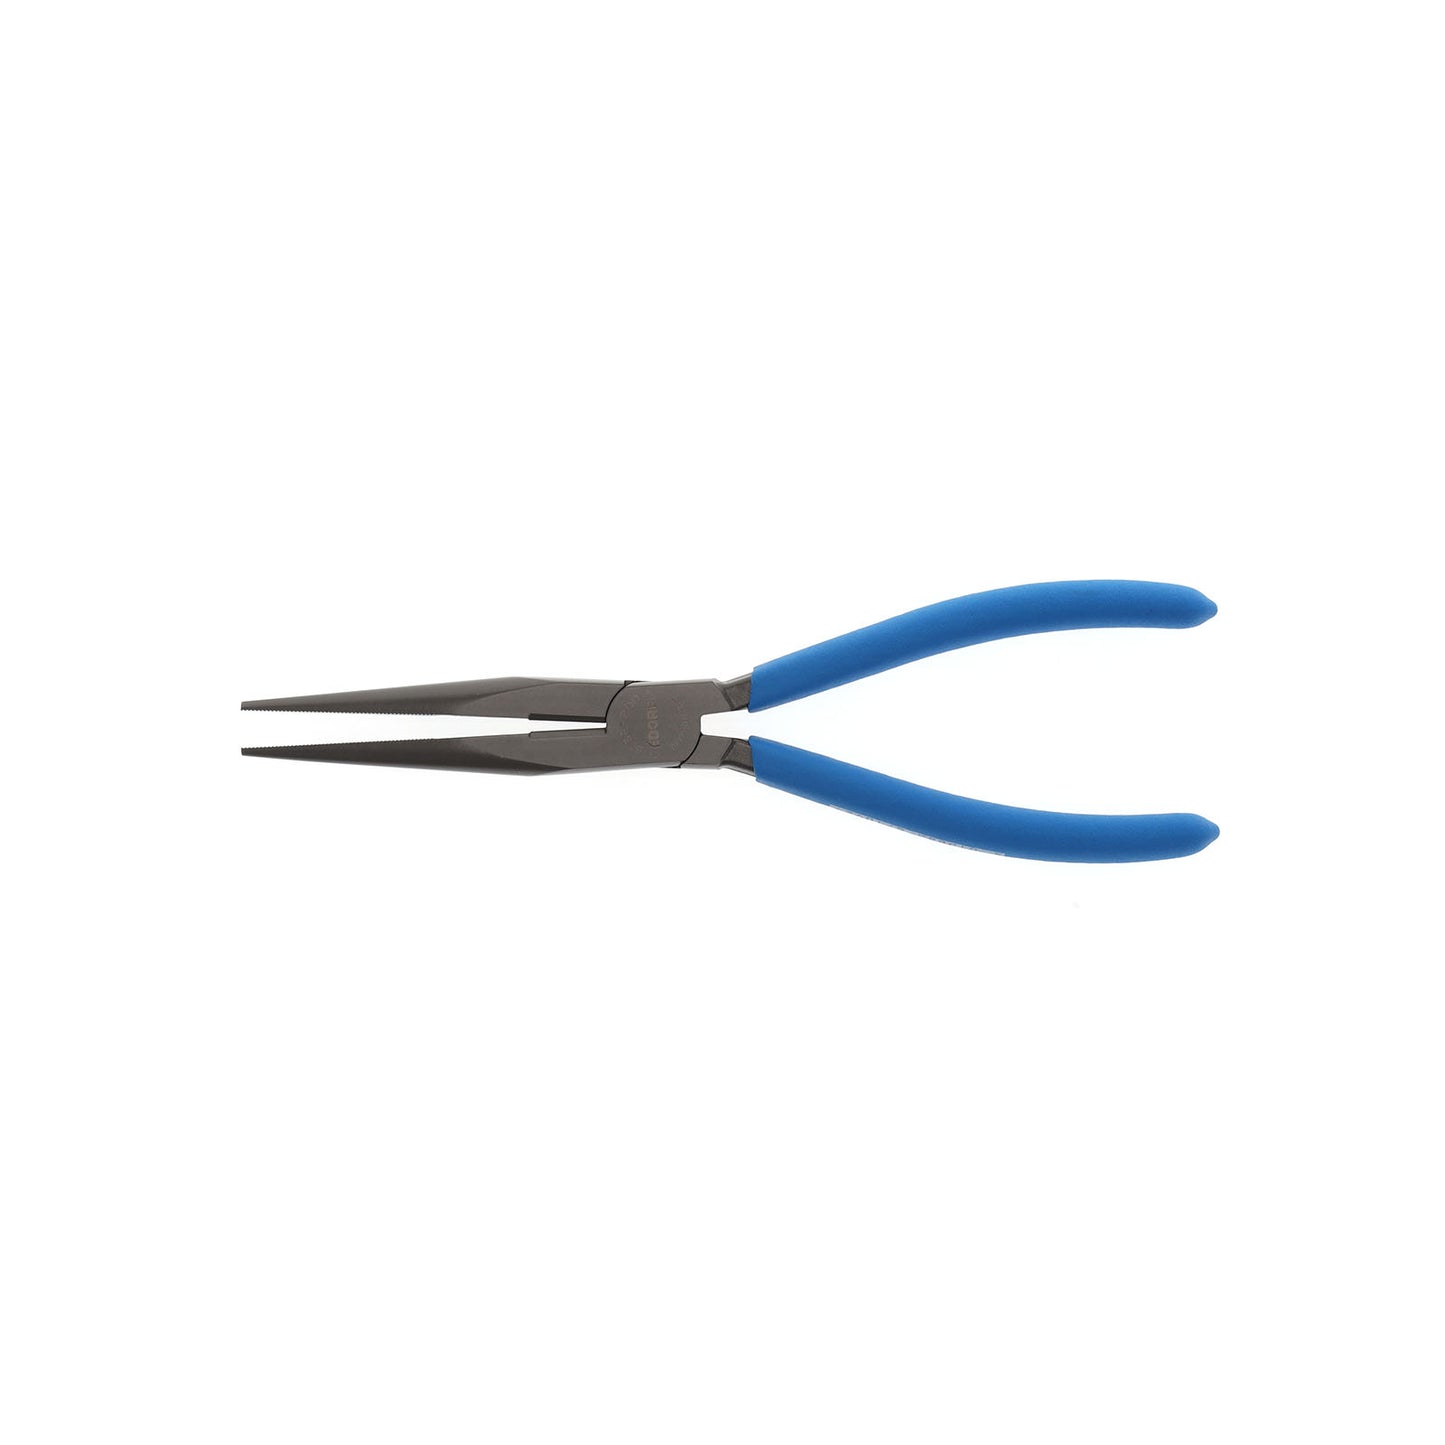 GEDORE 8132-200 TL - Semi-round nose pliers 200mm (6710960)